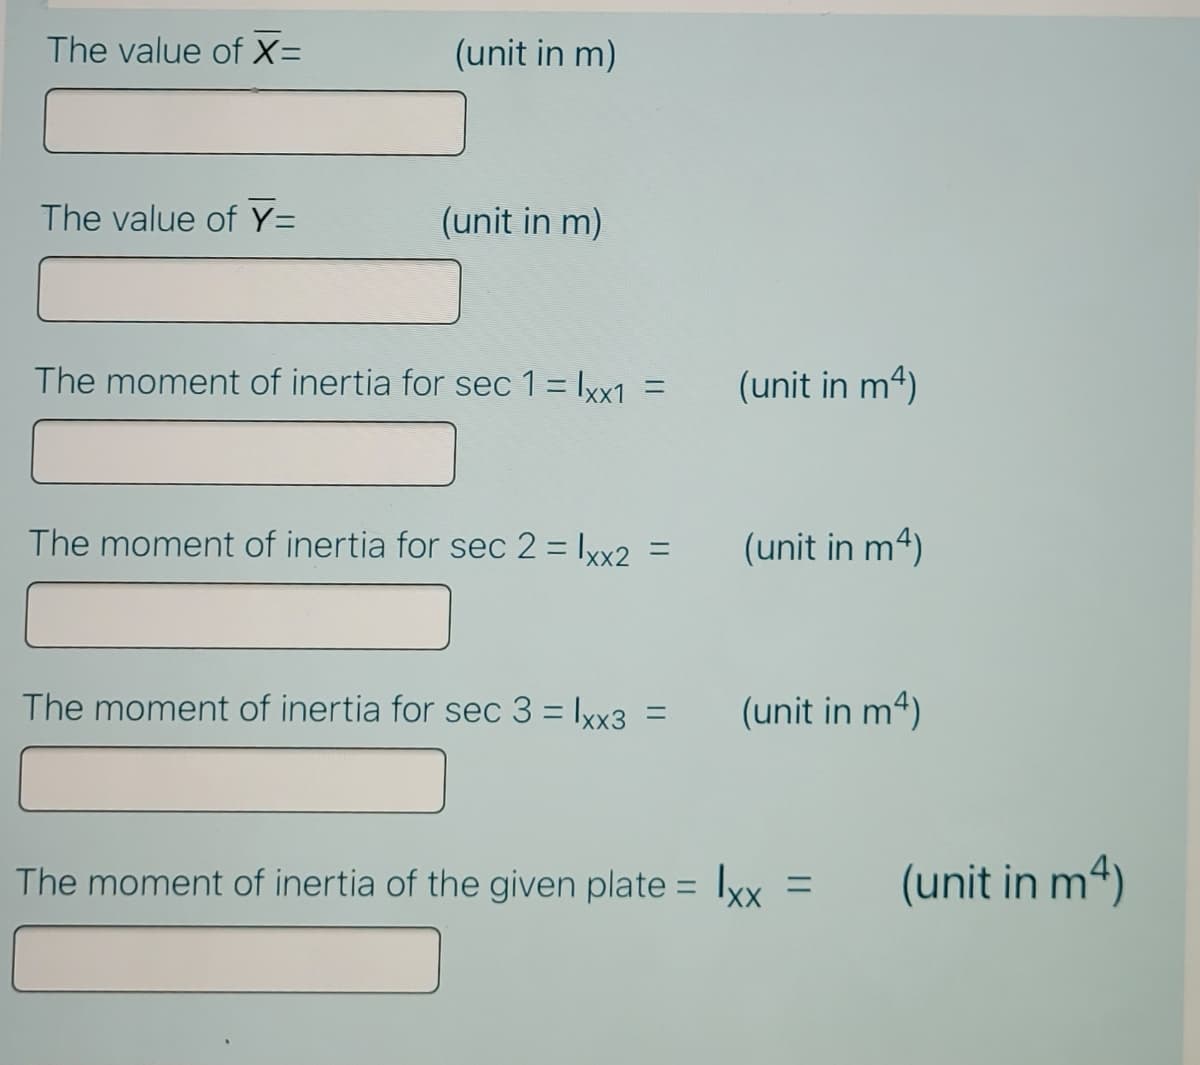 The value of X=
(unit in m)
The value of Y=
(unit in m)
The moment of inertia for sec 1 = lyx1 =
(unit in m4)
The moment of inertia for sec 2 = Ixx2 =
(unit in m4)
The moment of inertia for sec 3 = Ixx3
(unit in m4)
%3D
The moment of inertia of the given plate = lxx =
(unit in m4)
